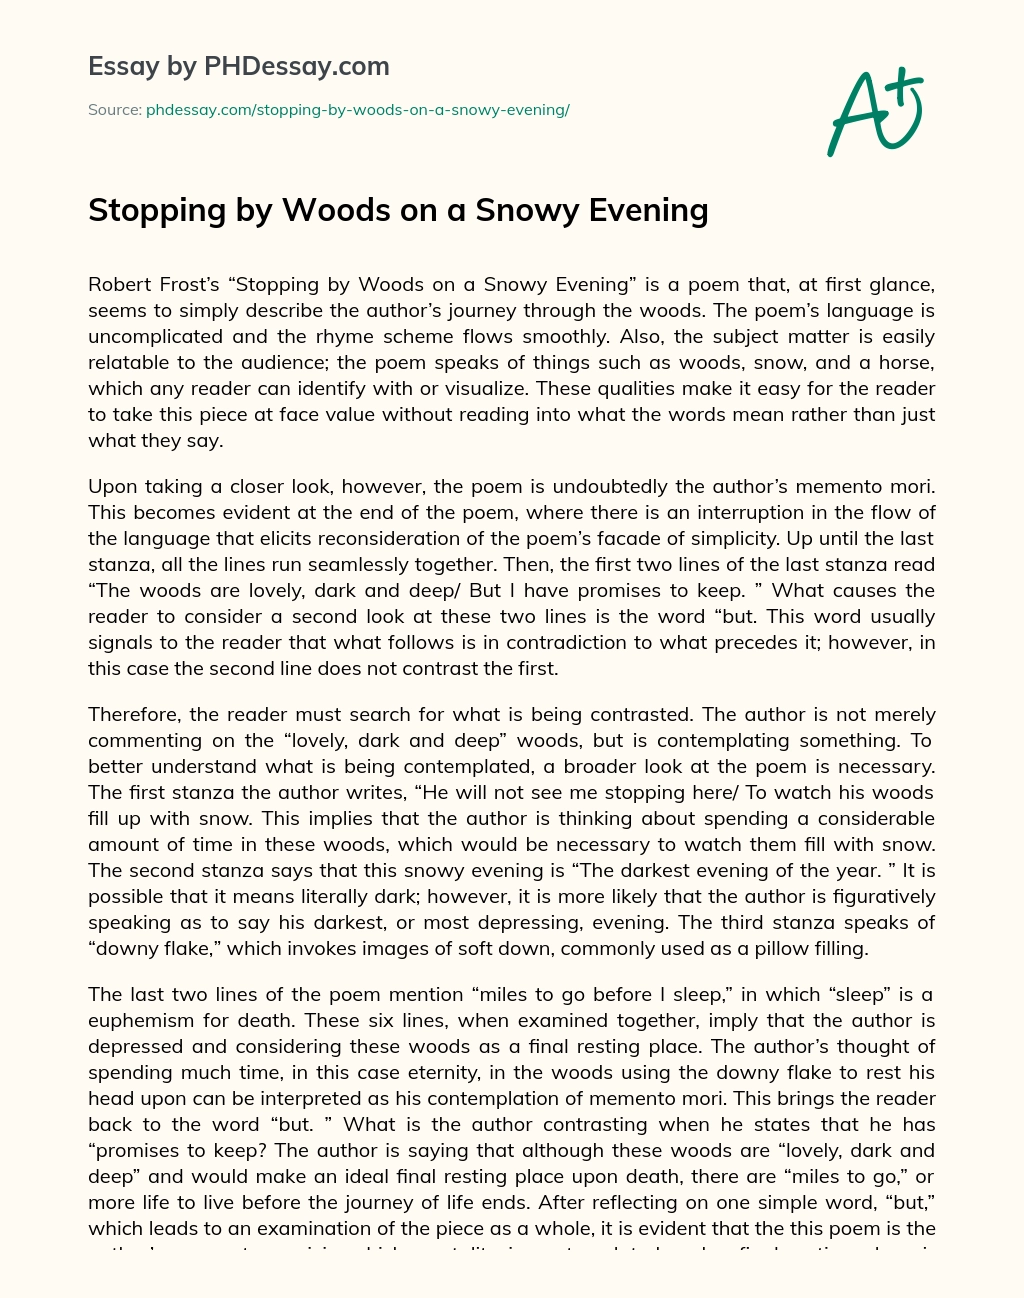 Stopping by Woods on a Snowy Evening essay